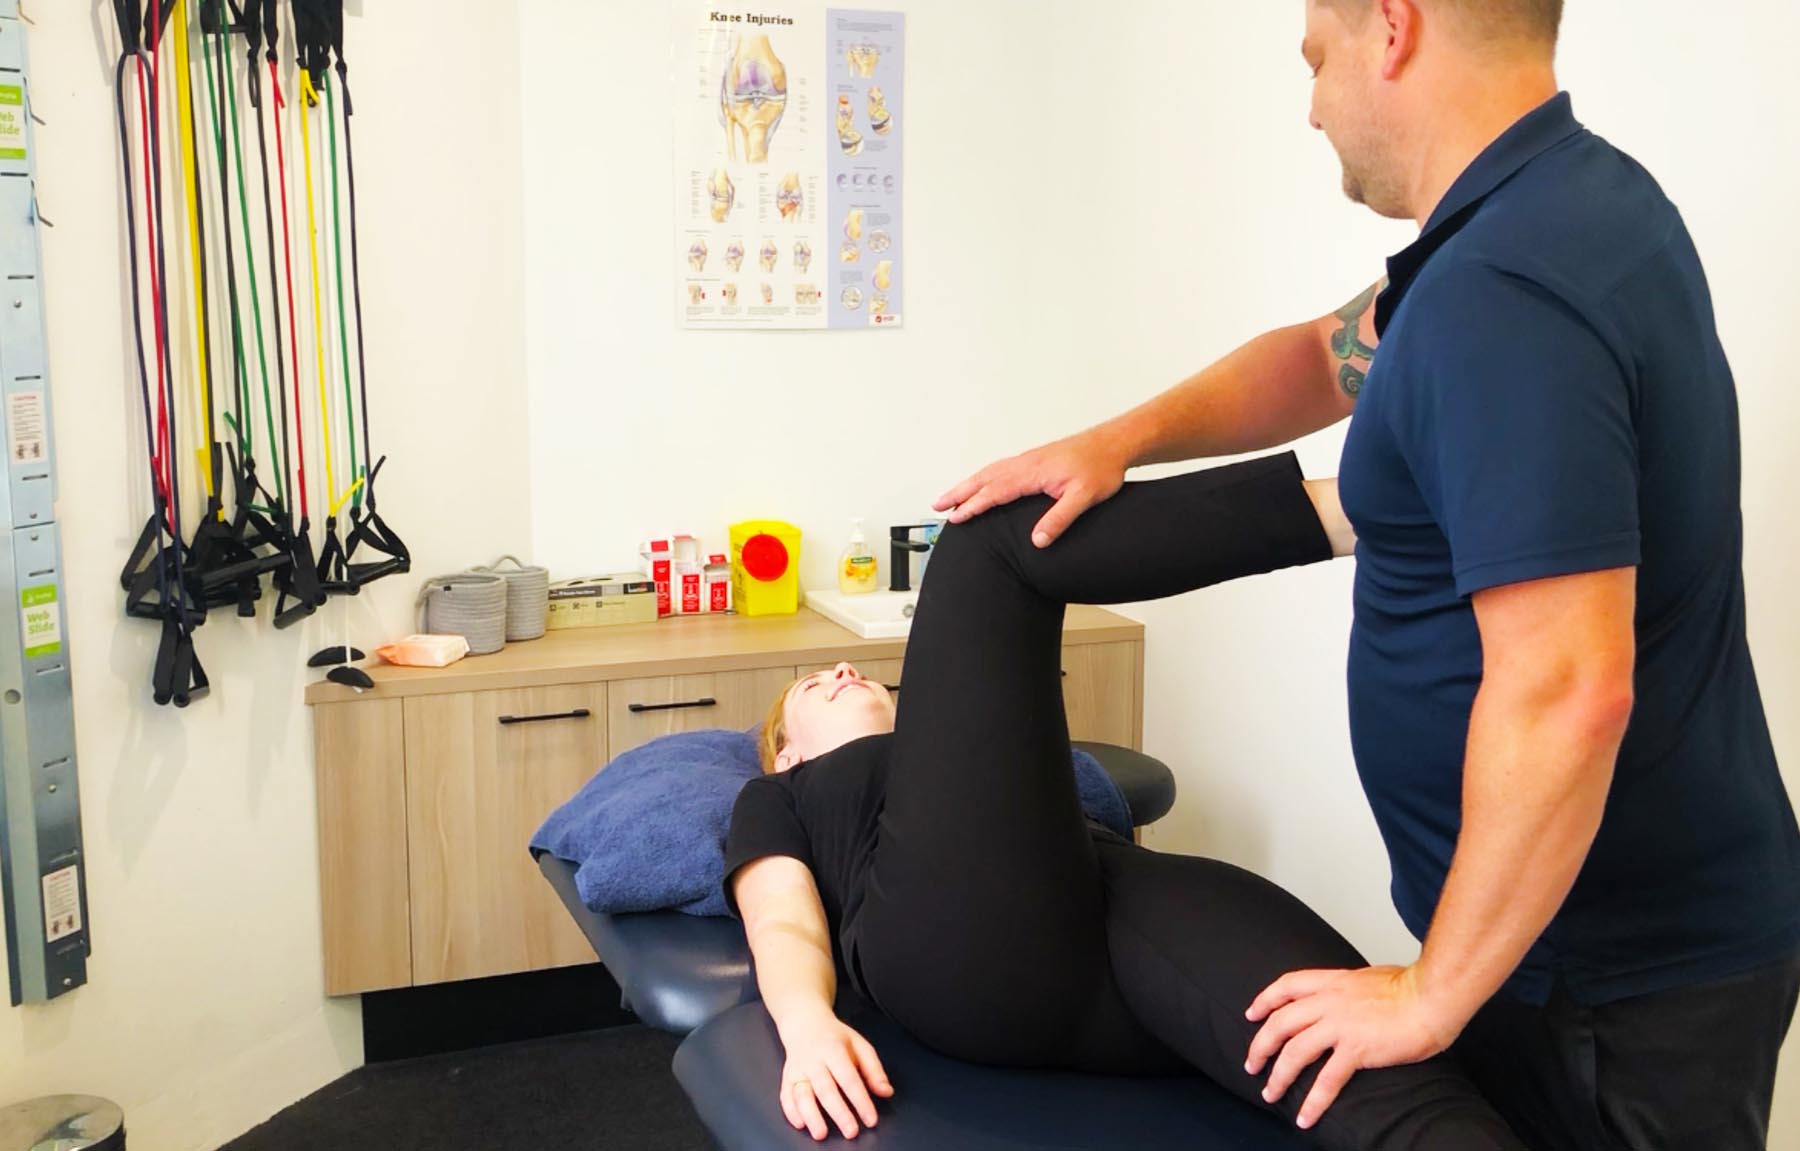 Types Of Manual Therapy Techniques And Treatments Bondi Junction Eastern Suburbs Sydney